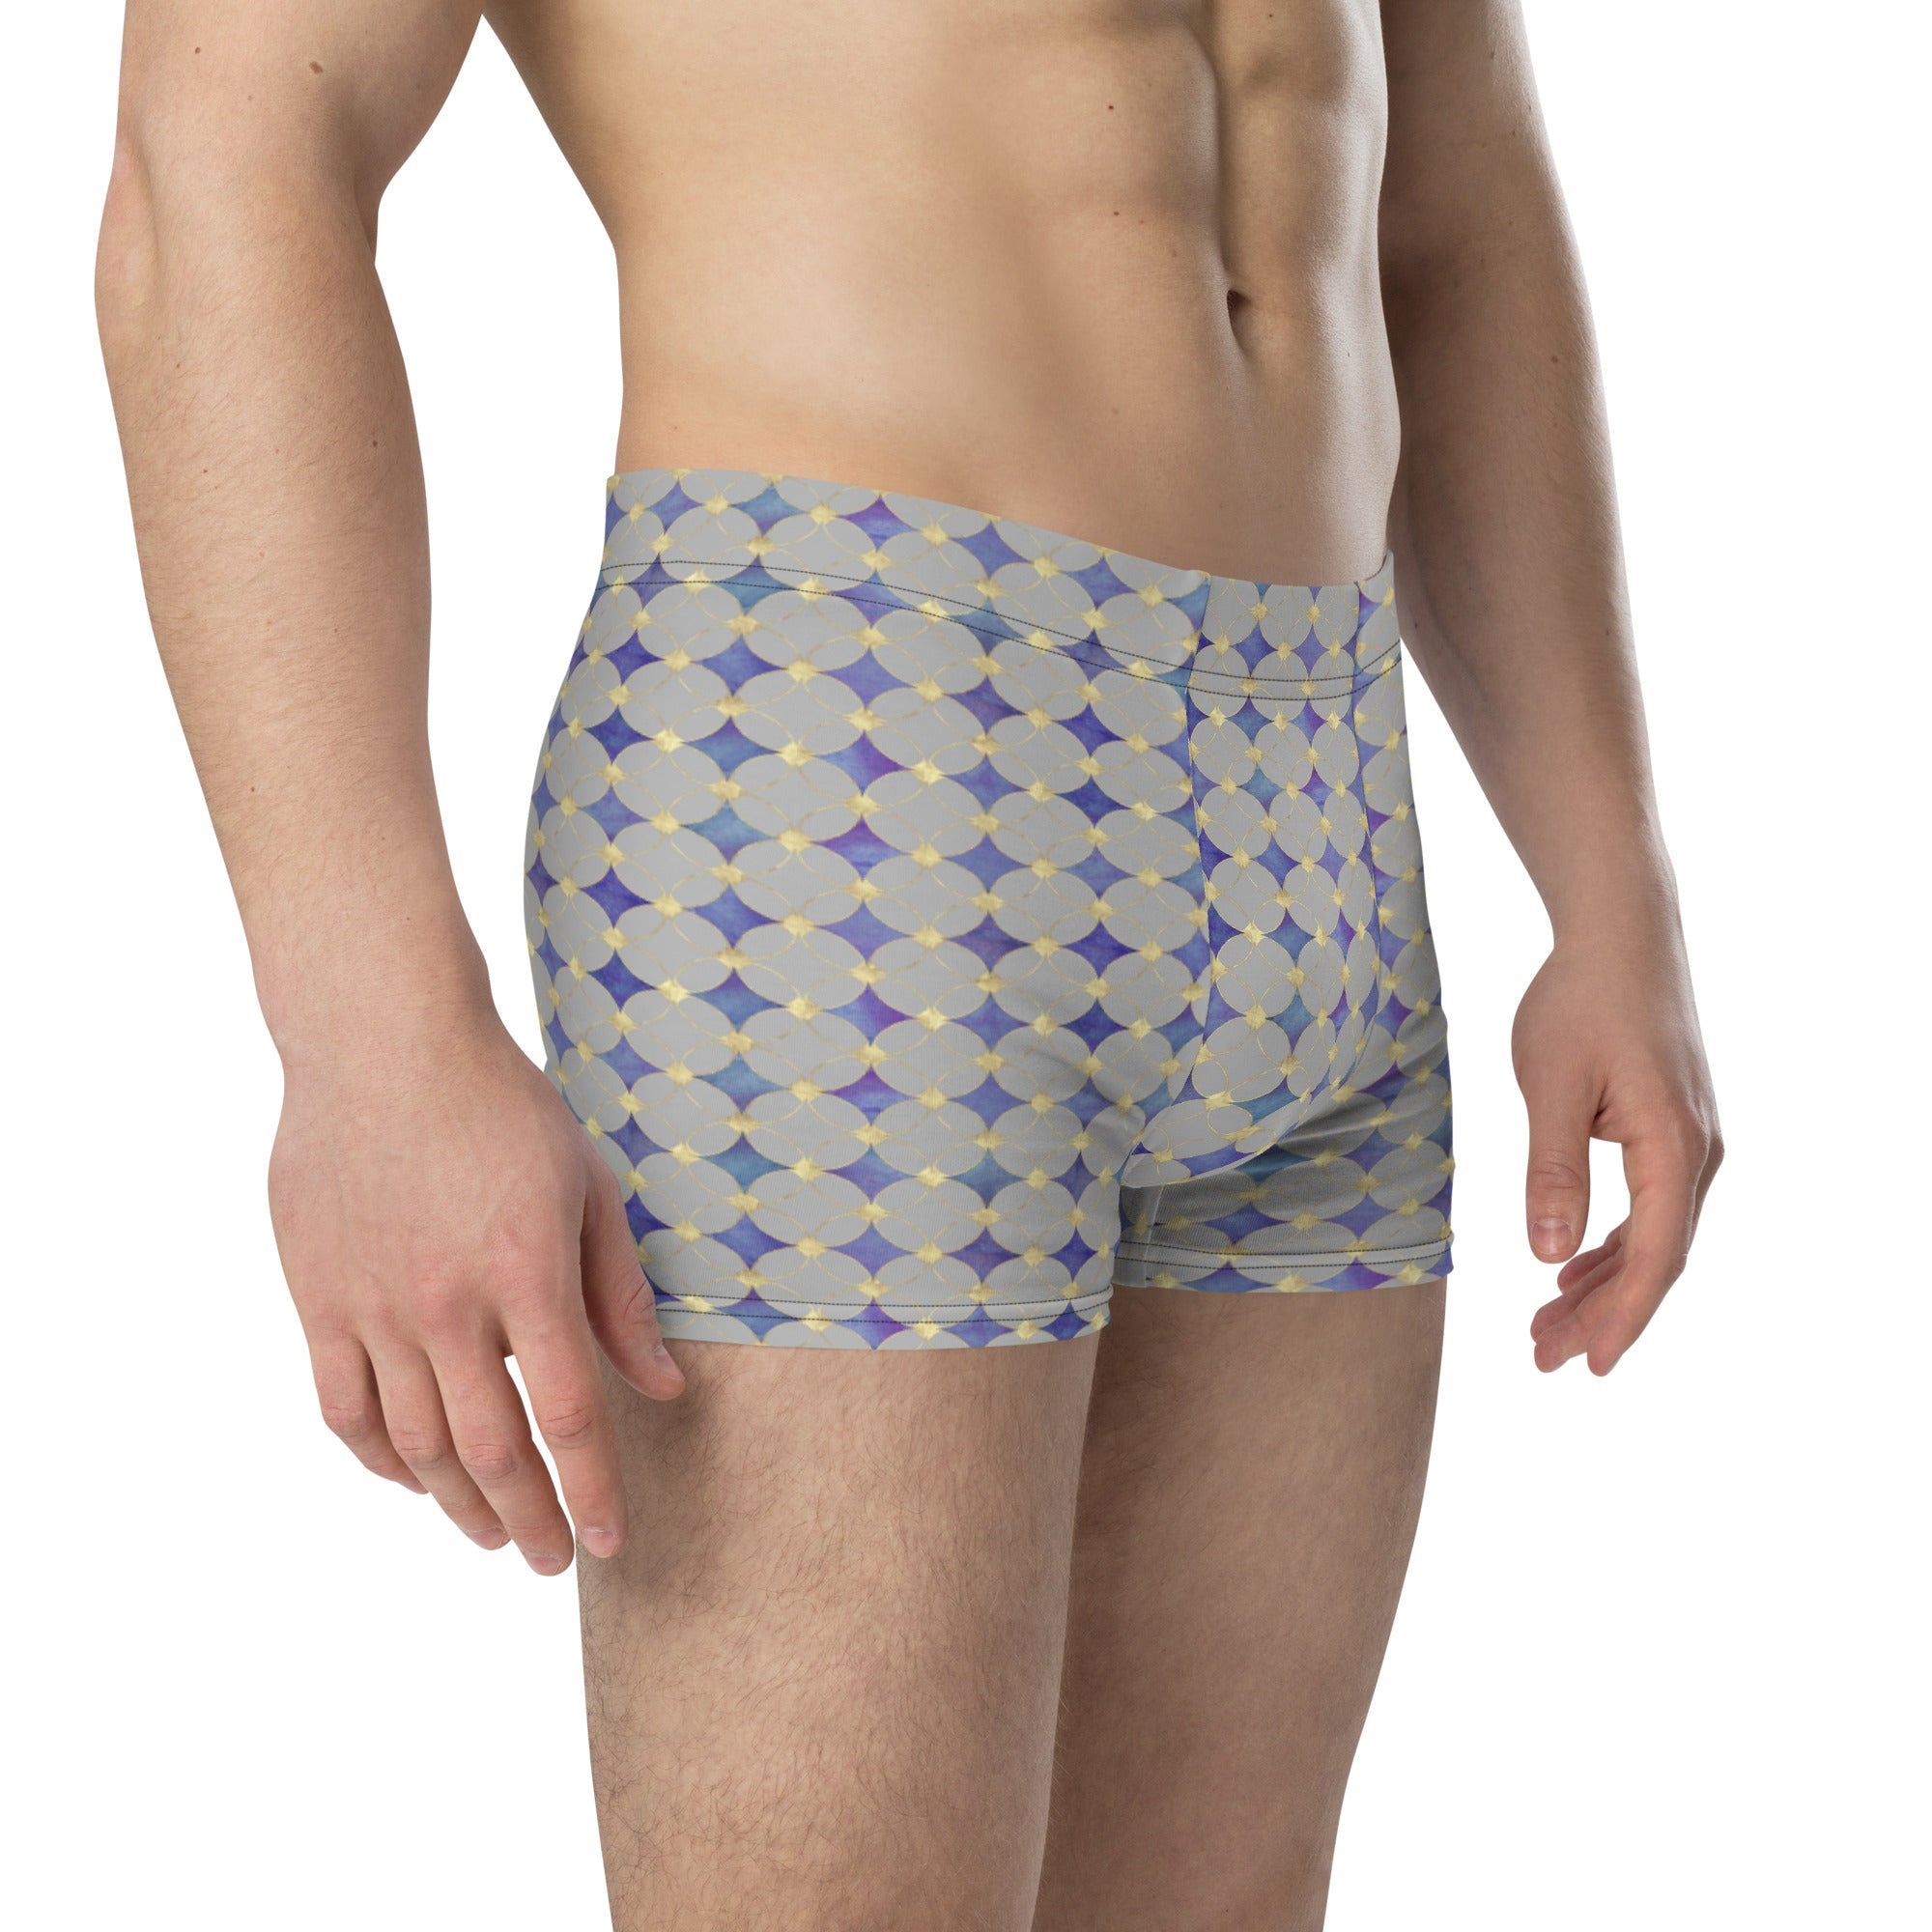 Grey graphic pattern boxer briefs for men